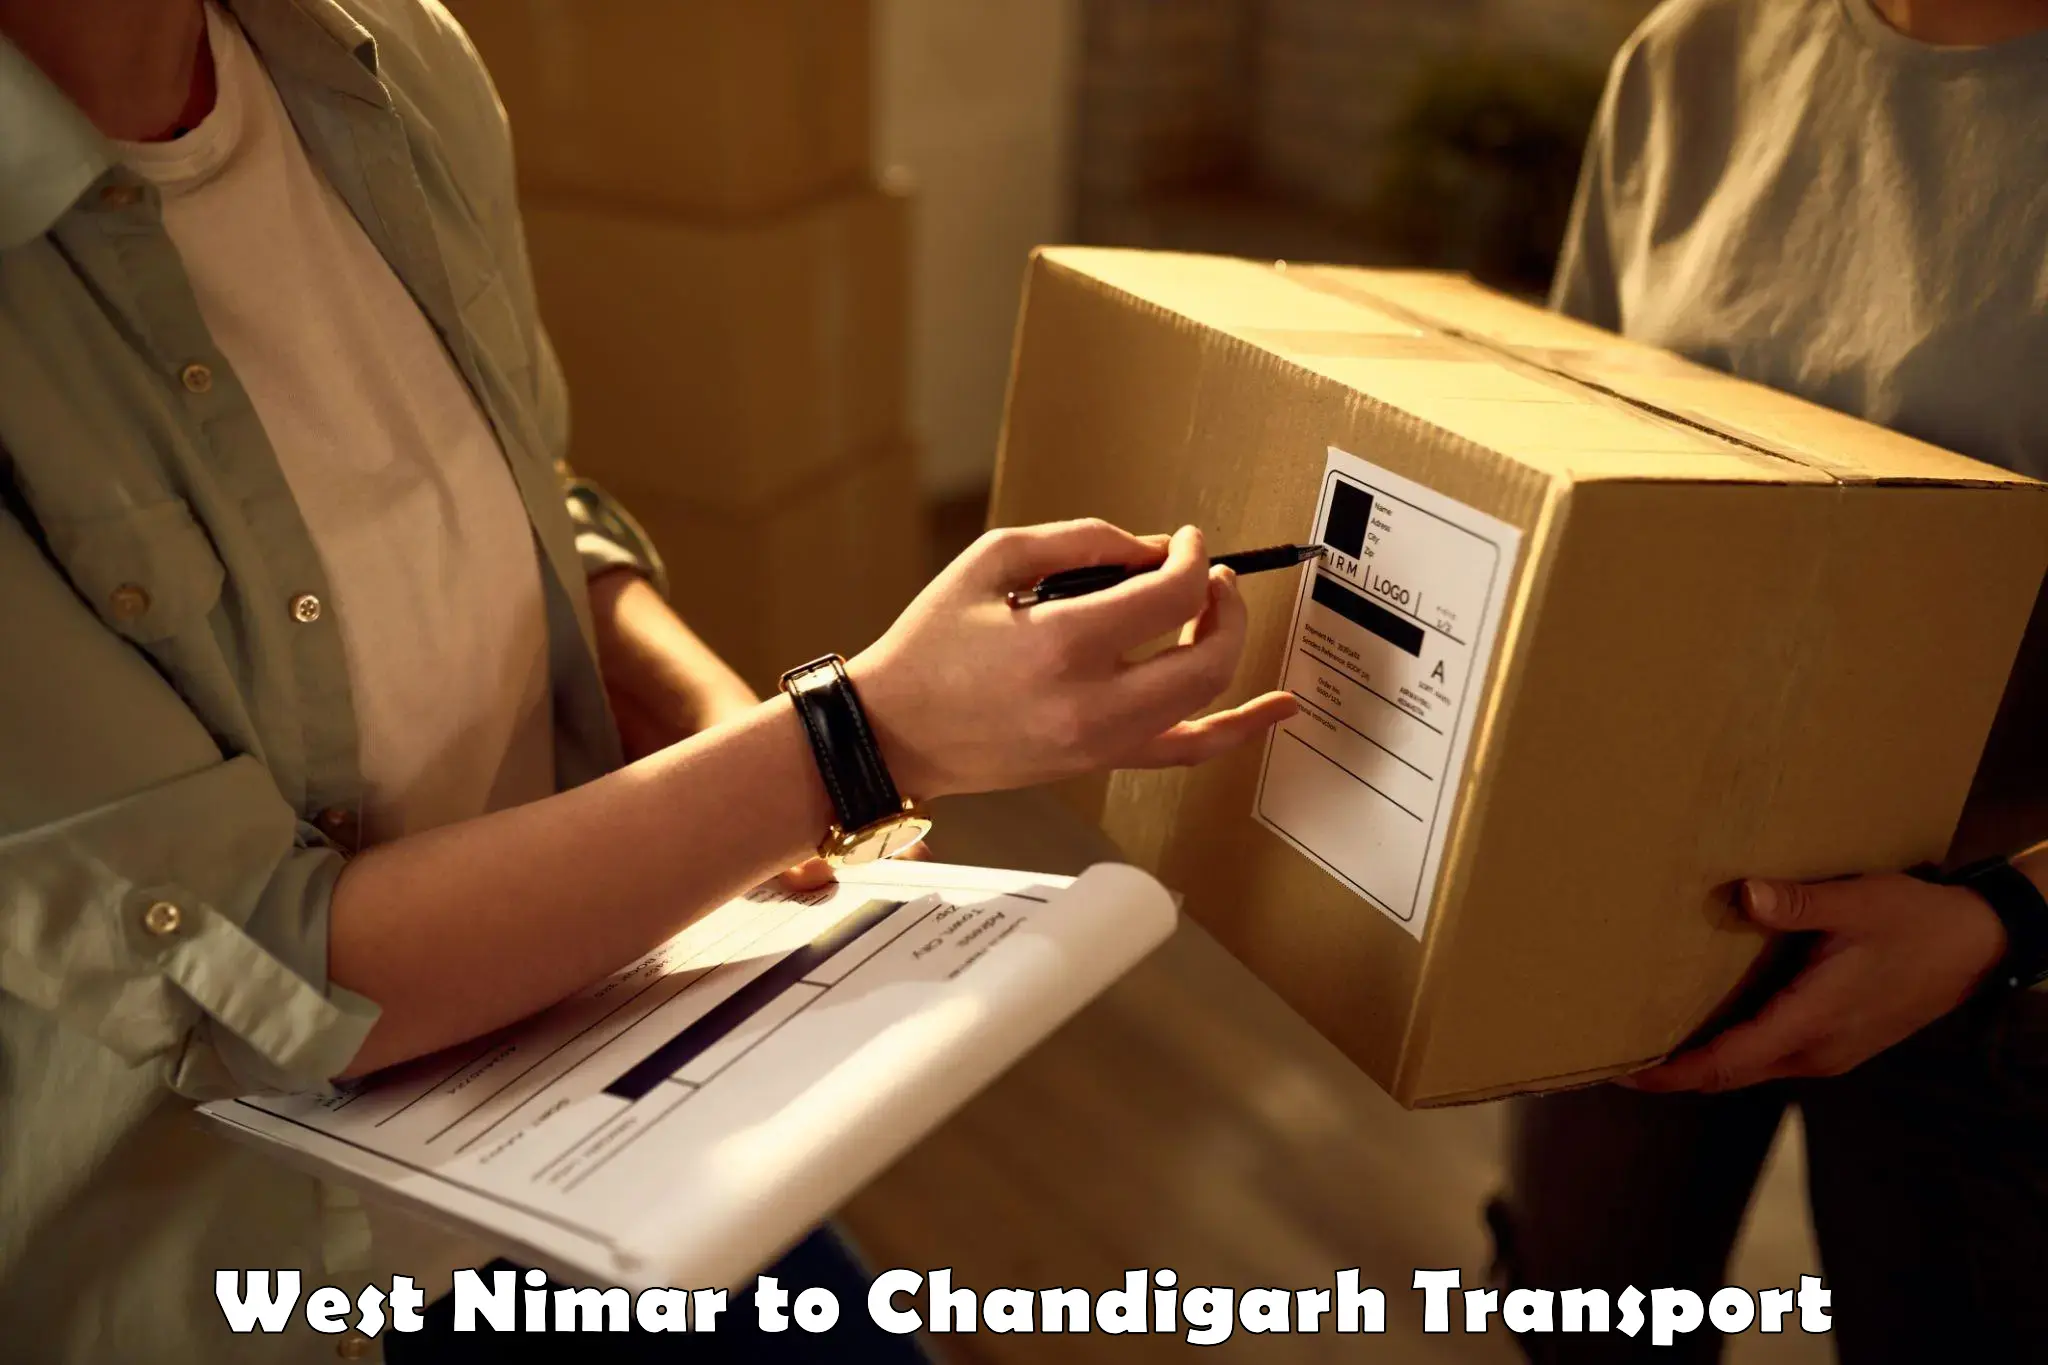 Delivery service West Nimar to Chandigarh